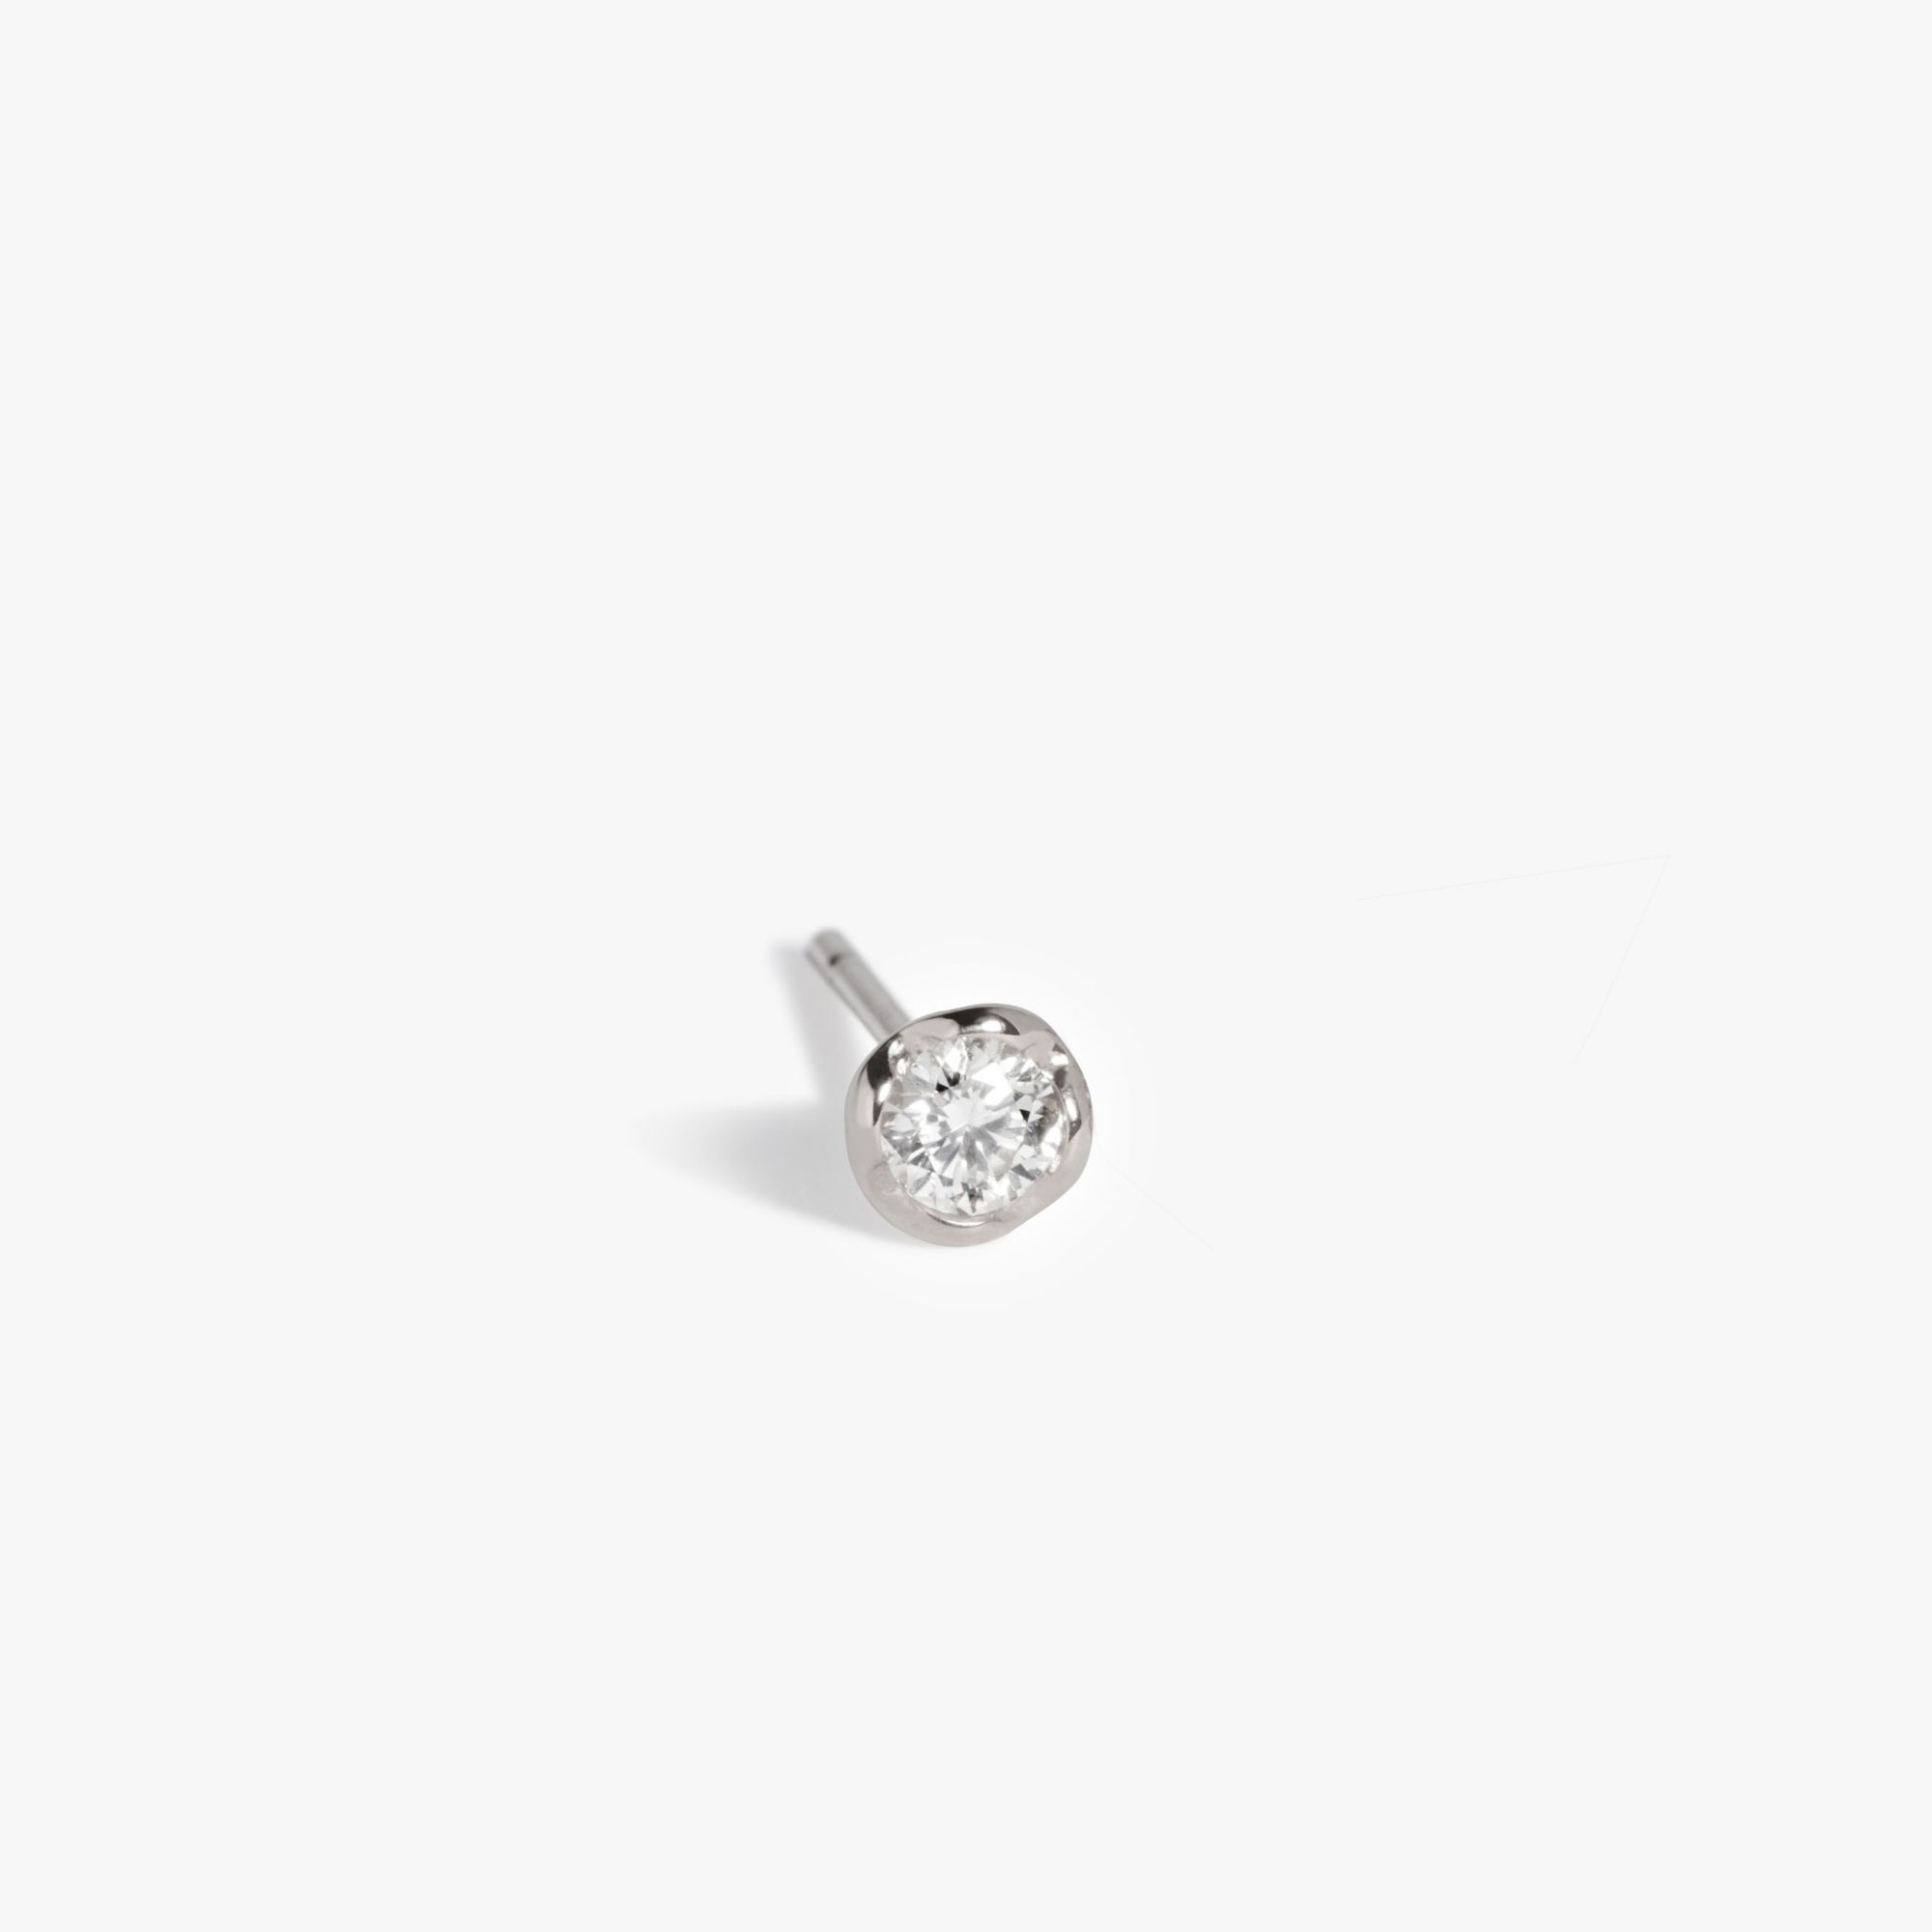 Whoopsie Daisy Solitaire Diamond Stud Earring